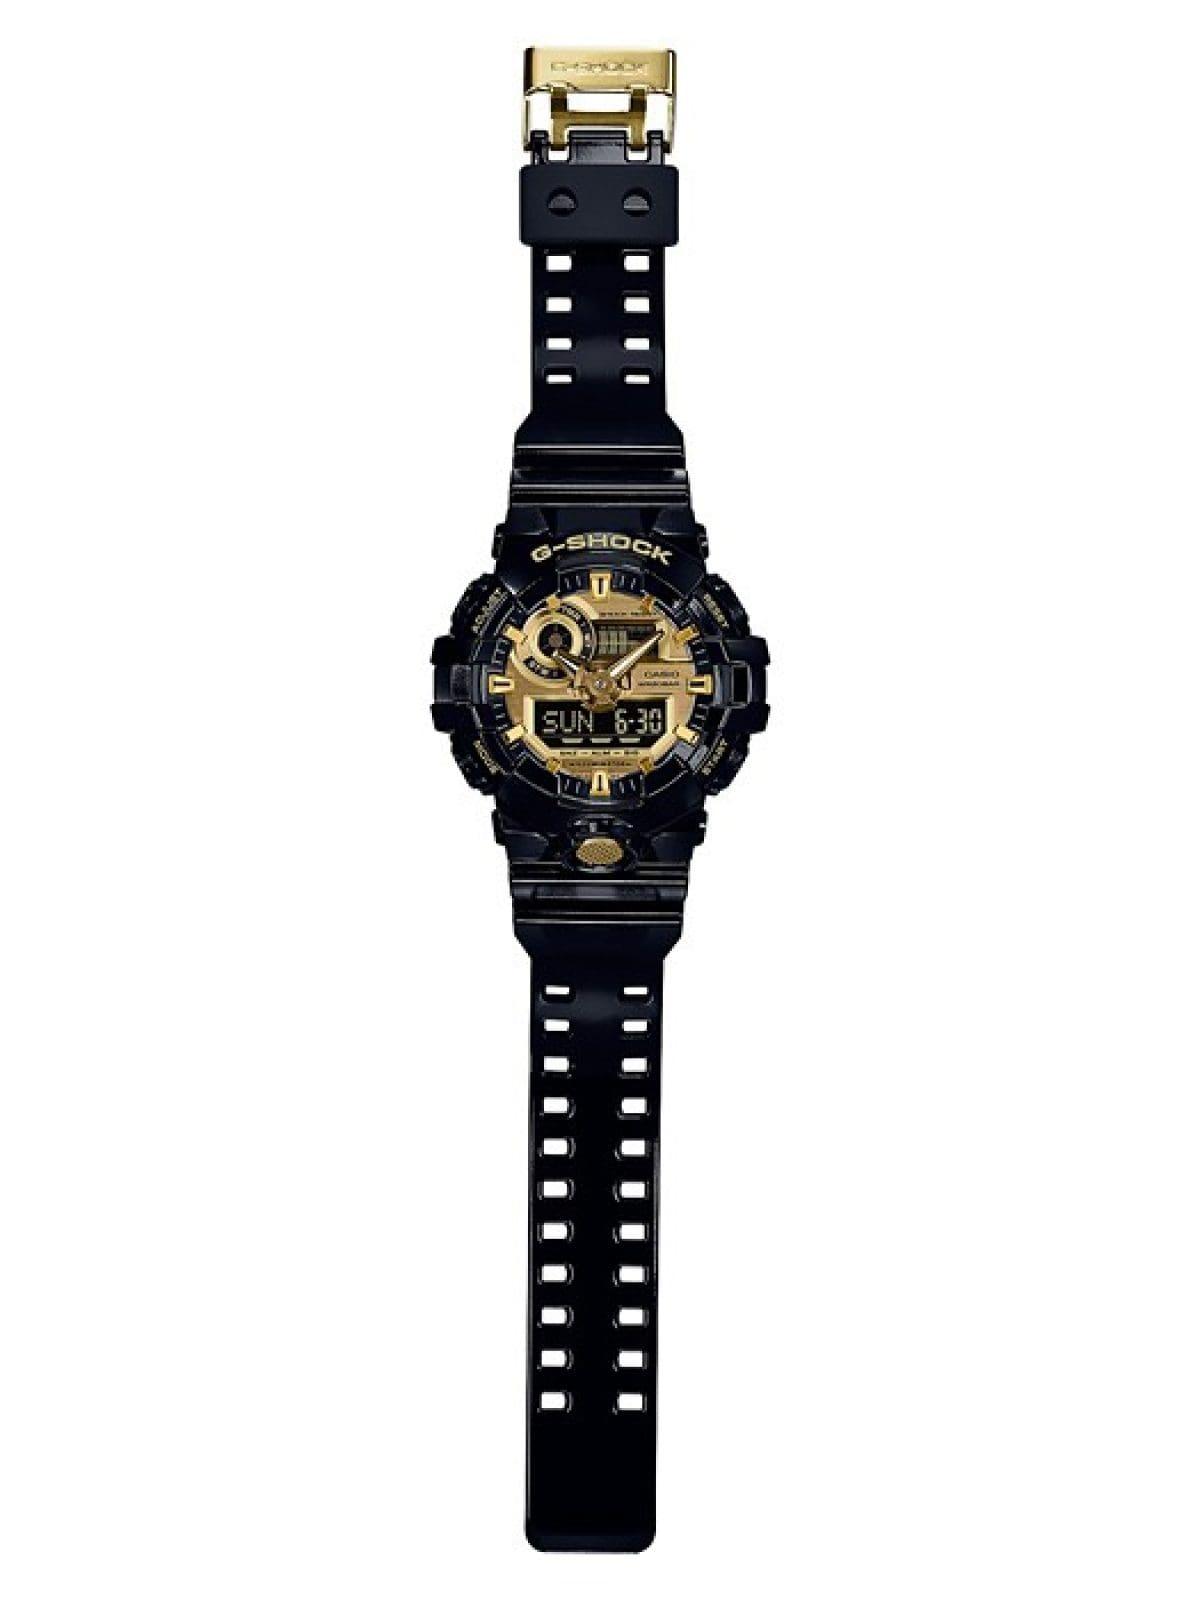 GA-700 Series Watch - Gold and Black